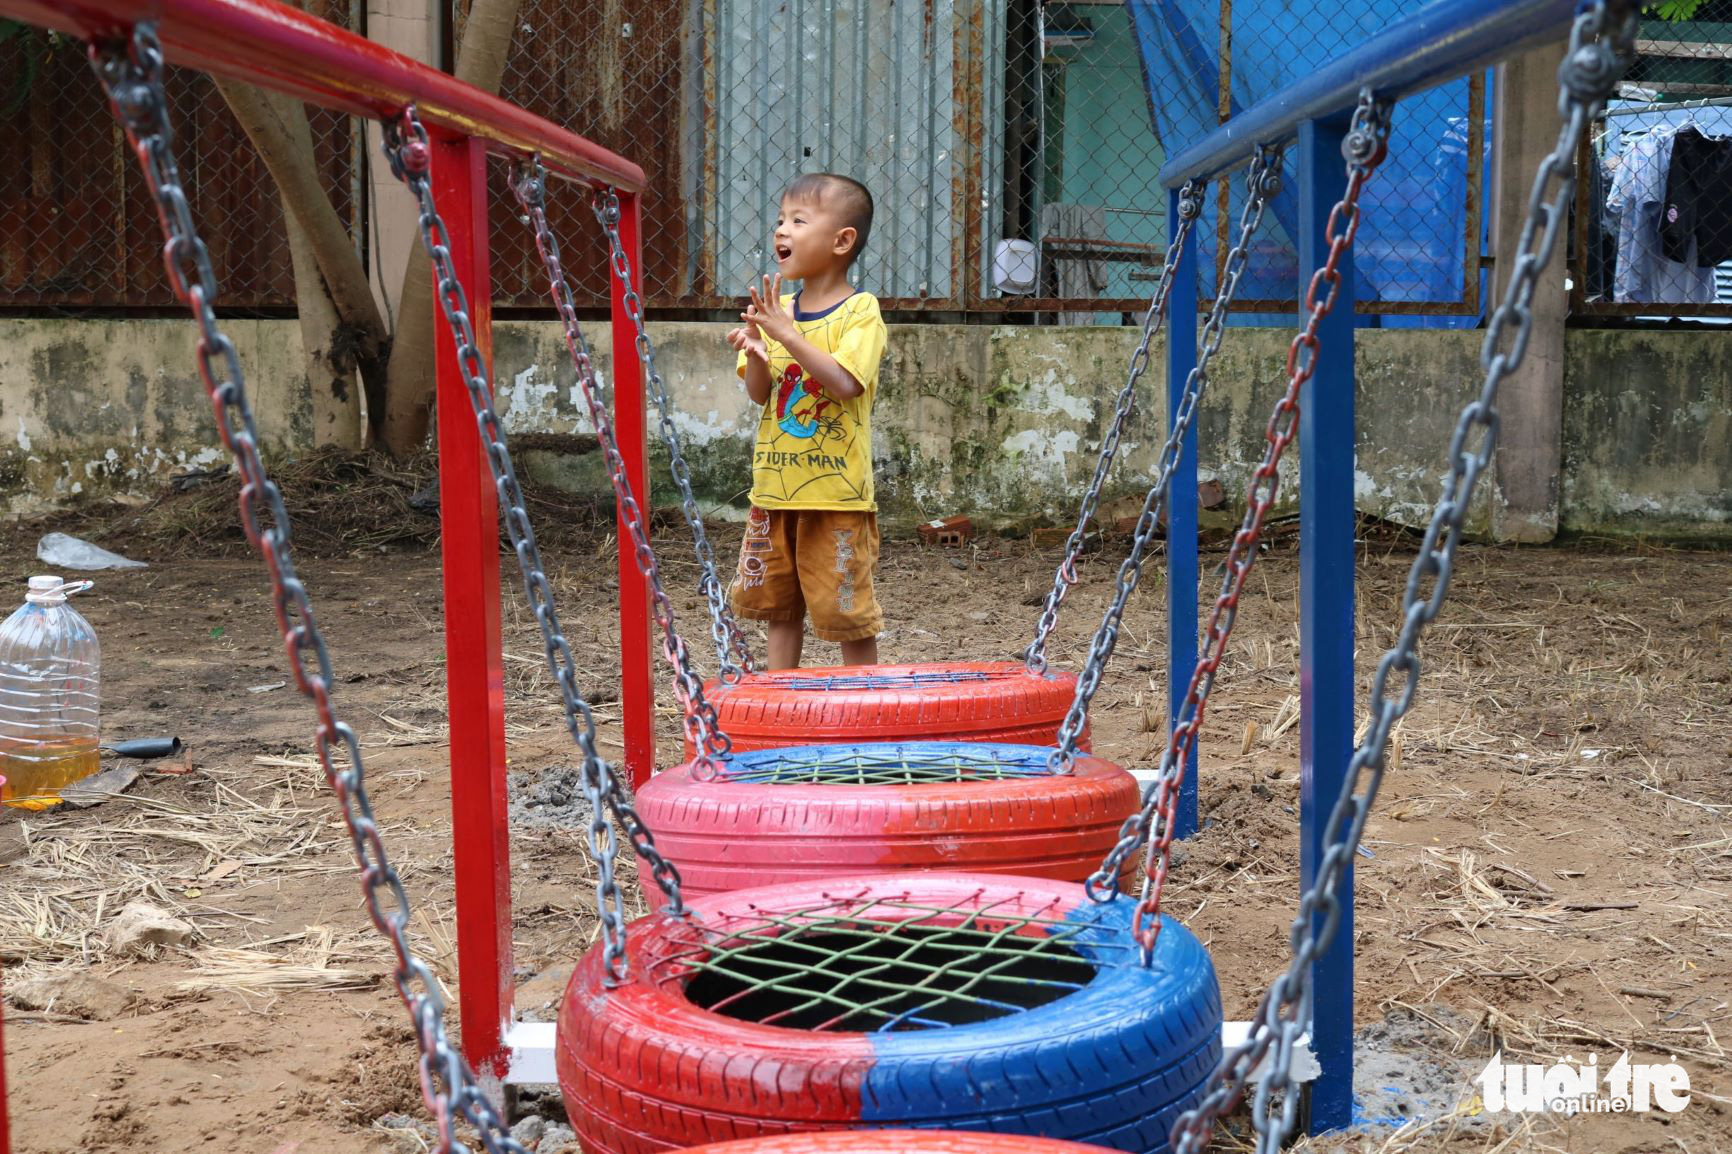 Upcycling old tires into toys for disadvantaged children Vietnam's remote areas